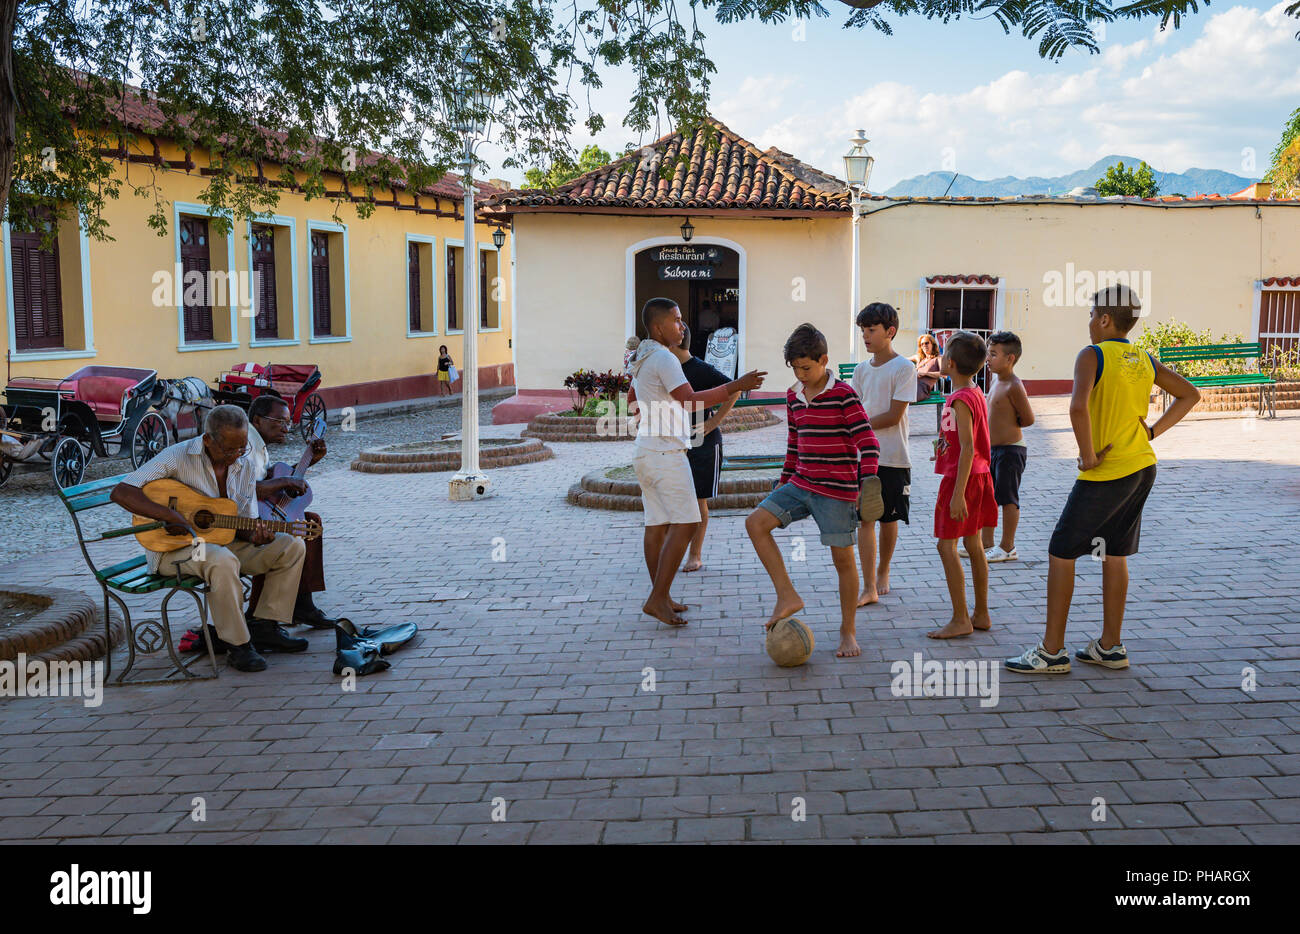 Trinidad, Cuba / March 15, 2016: Young boys playing soccer in a town square as two men play traditional Cuban music on guitars. Stock Photo